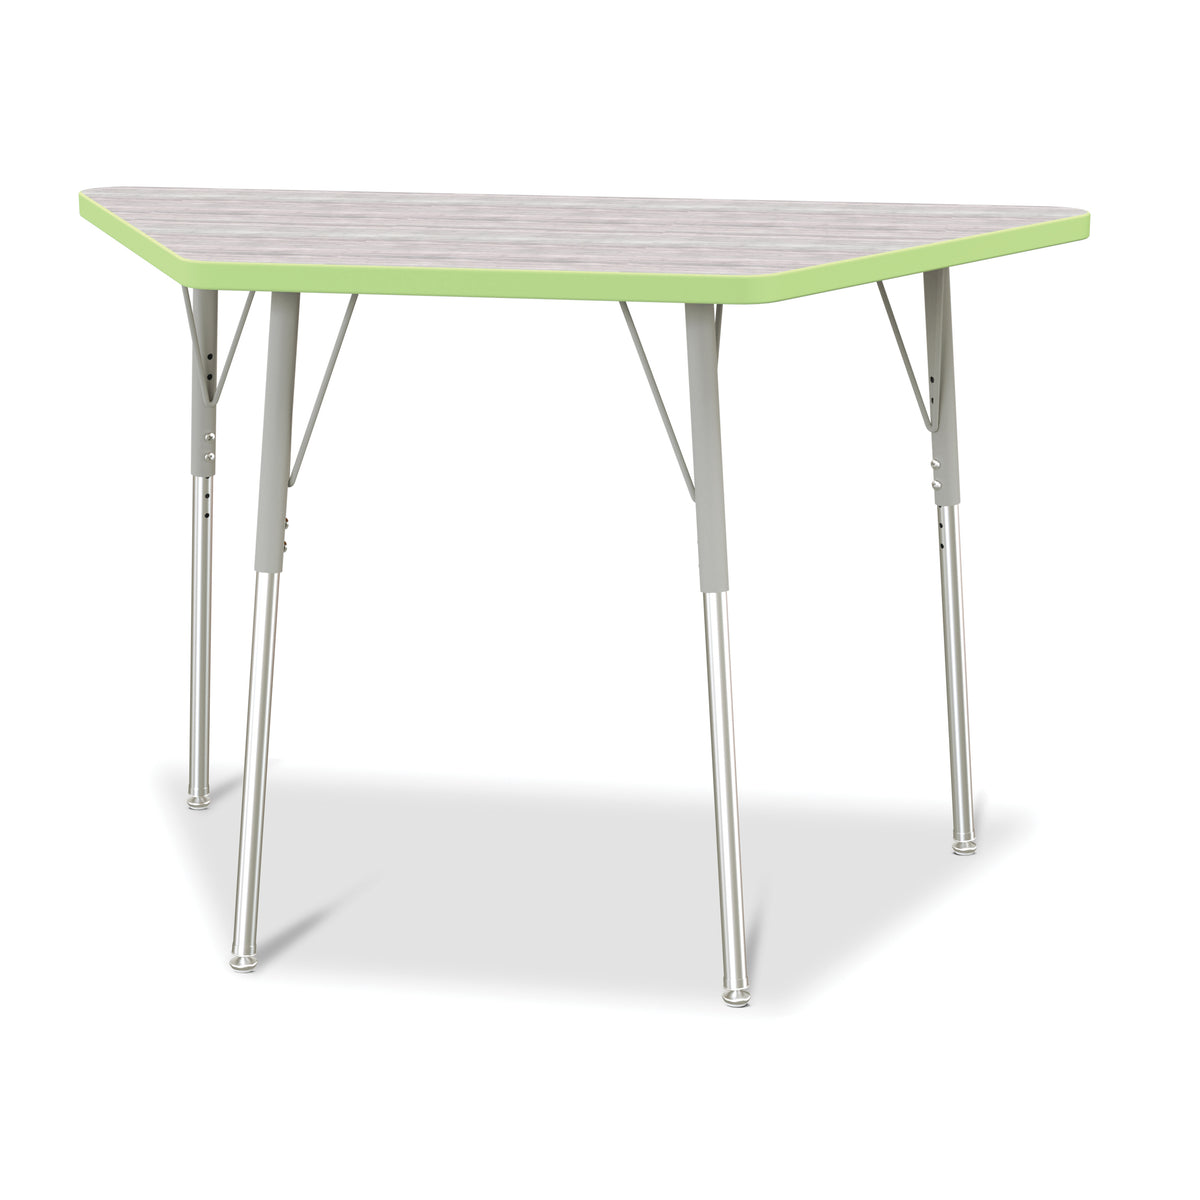 6438JCA451, Berries Trapezoid Activity Table - 24" X 48", A-height - Driftwood Gray/Key Lime/Gray